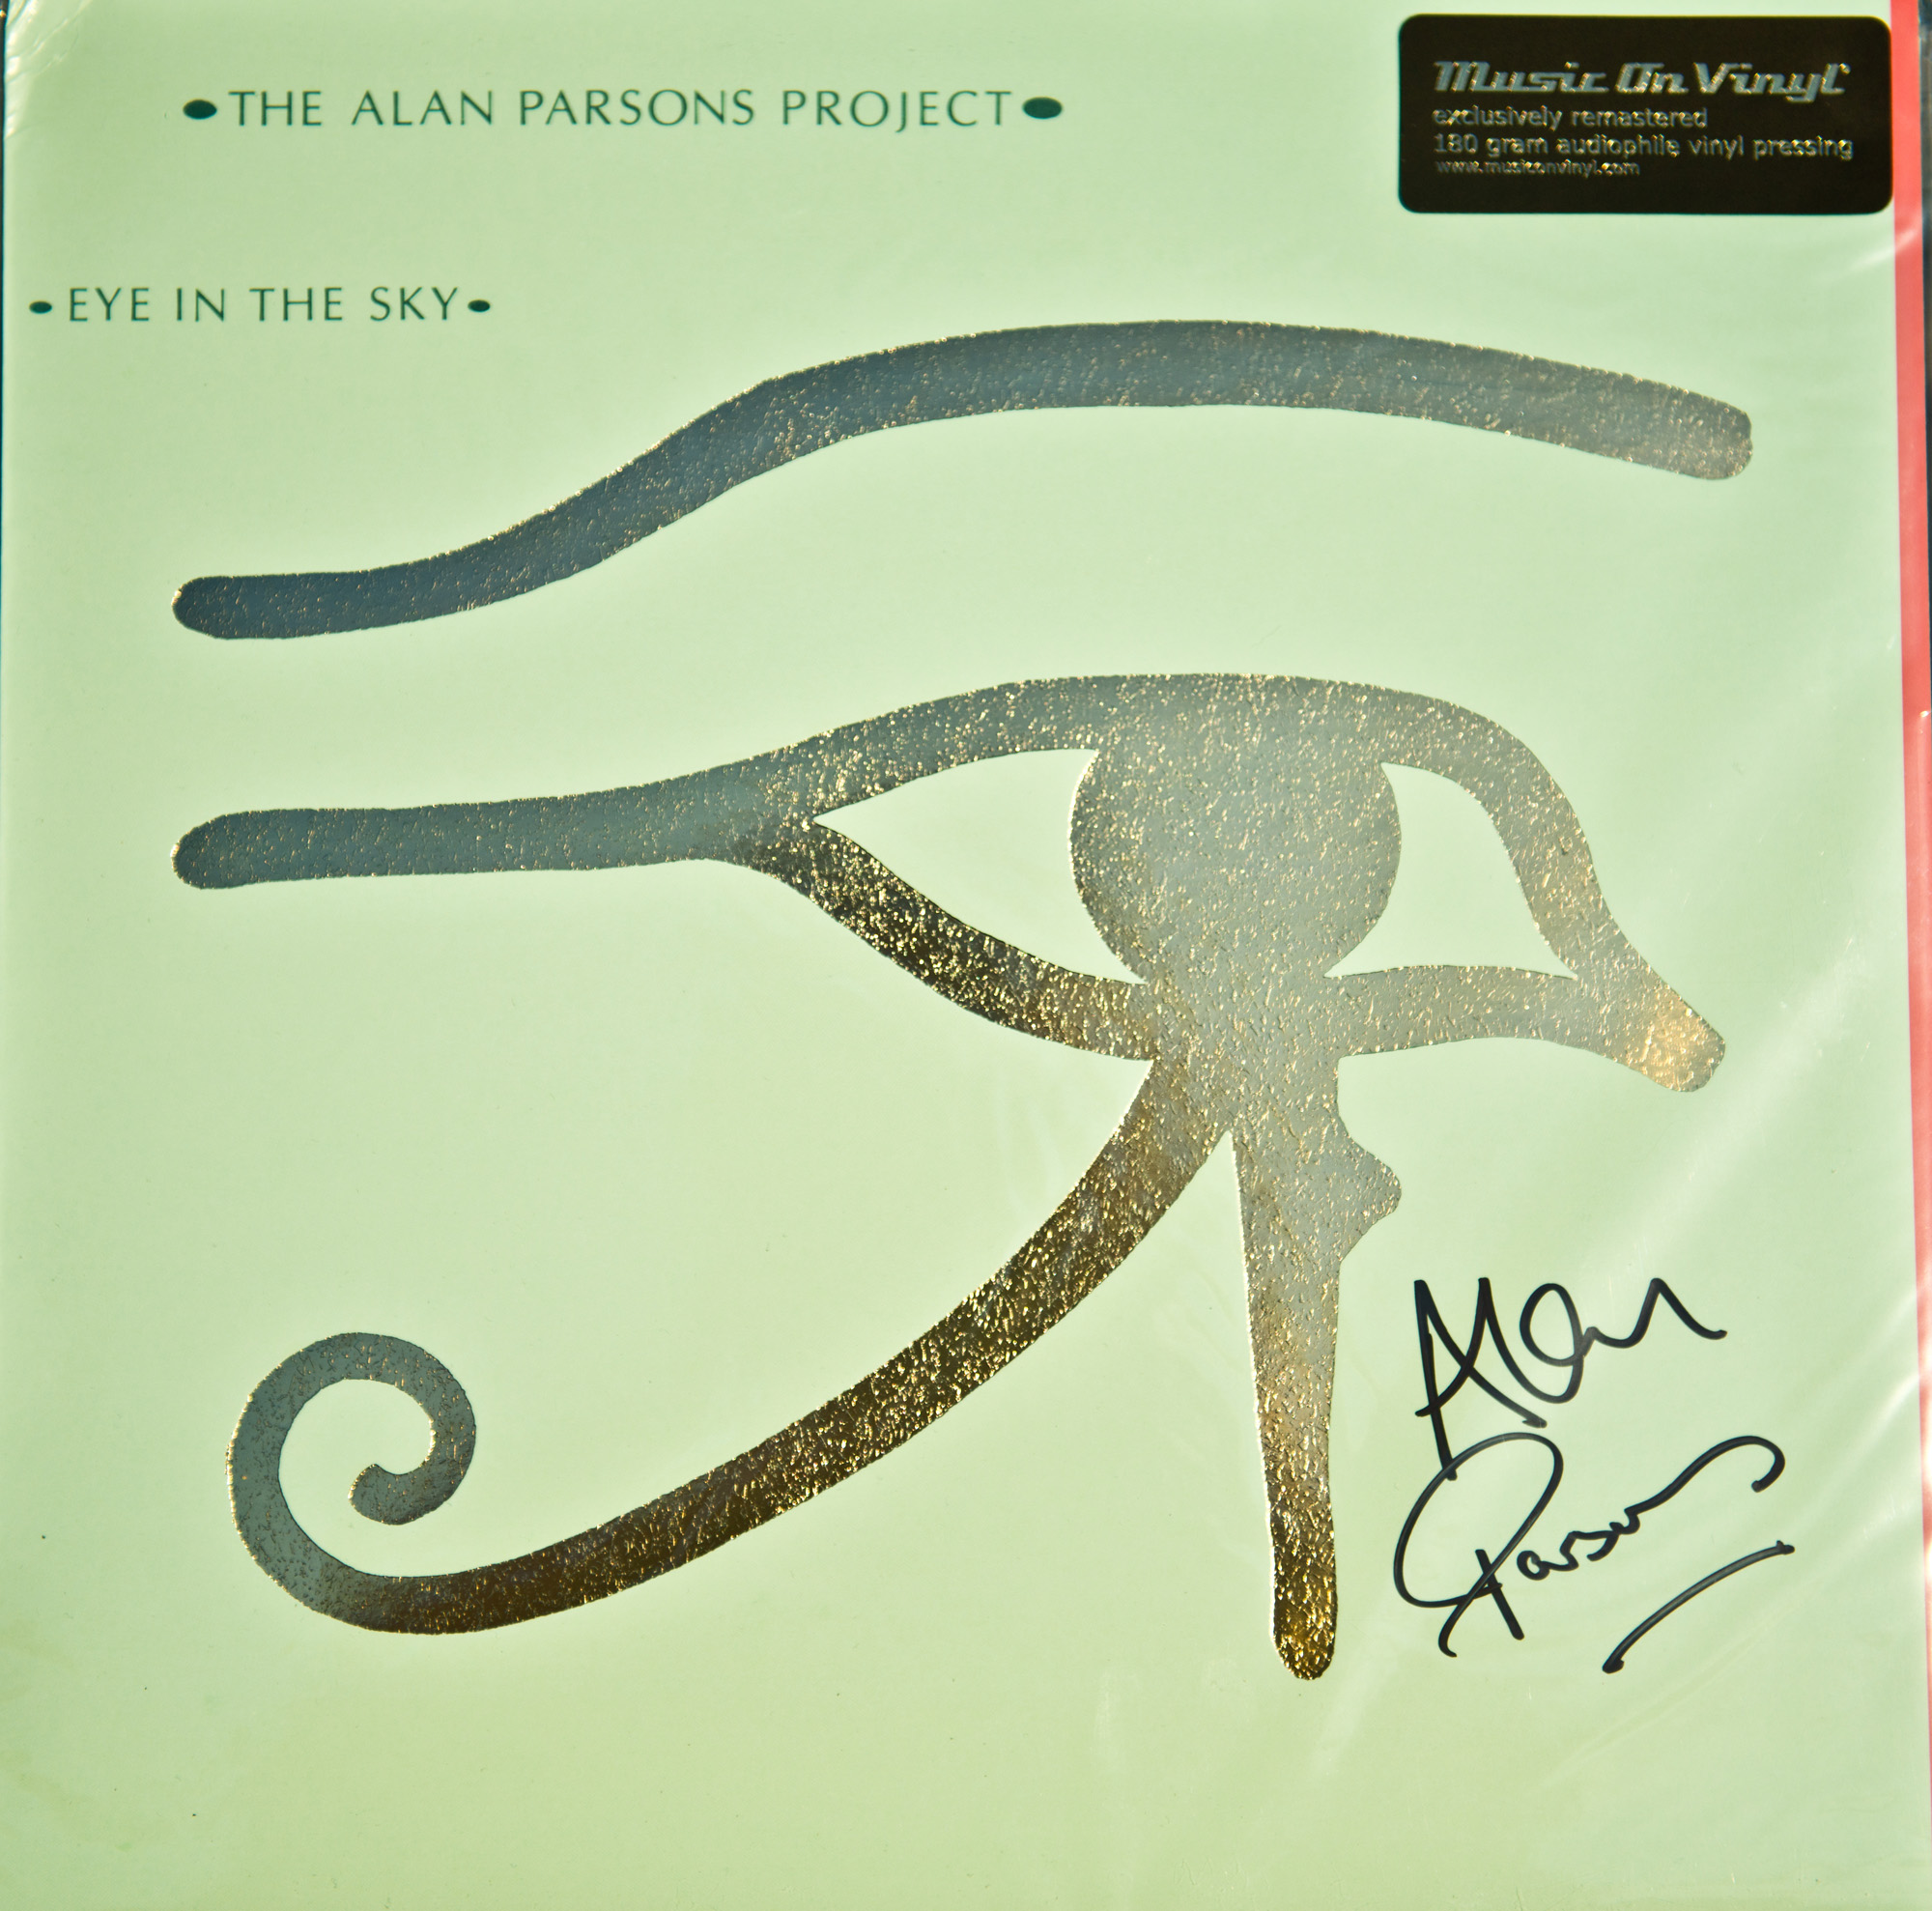 Alan parsons project torrent flac file